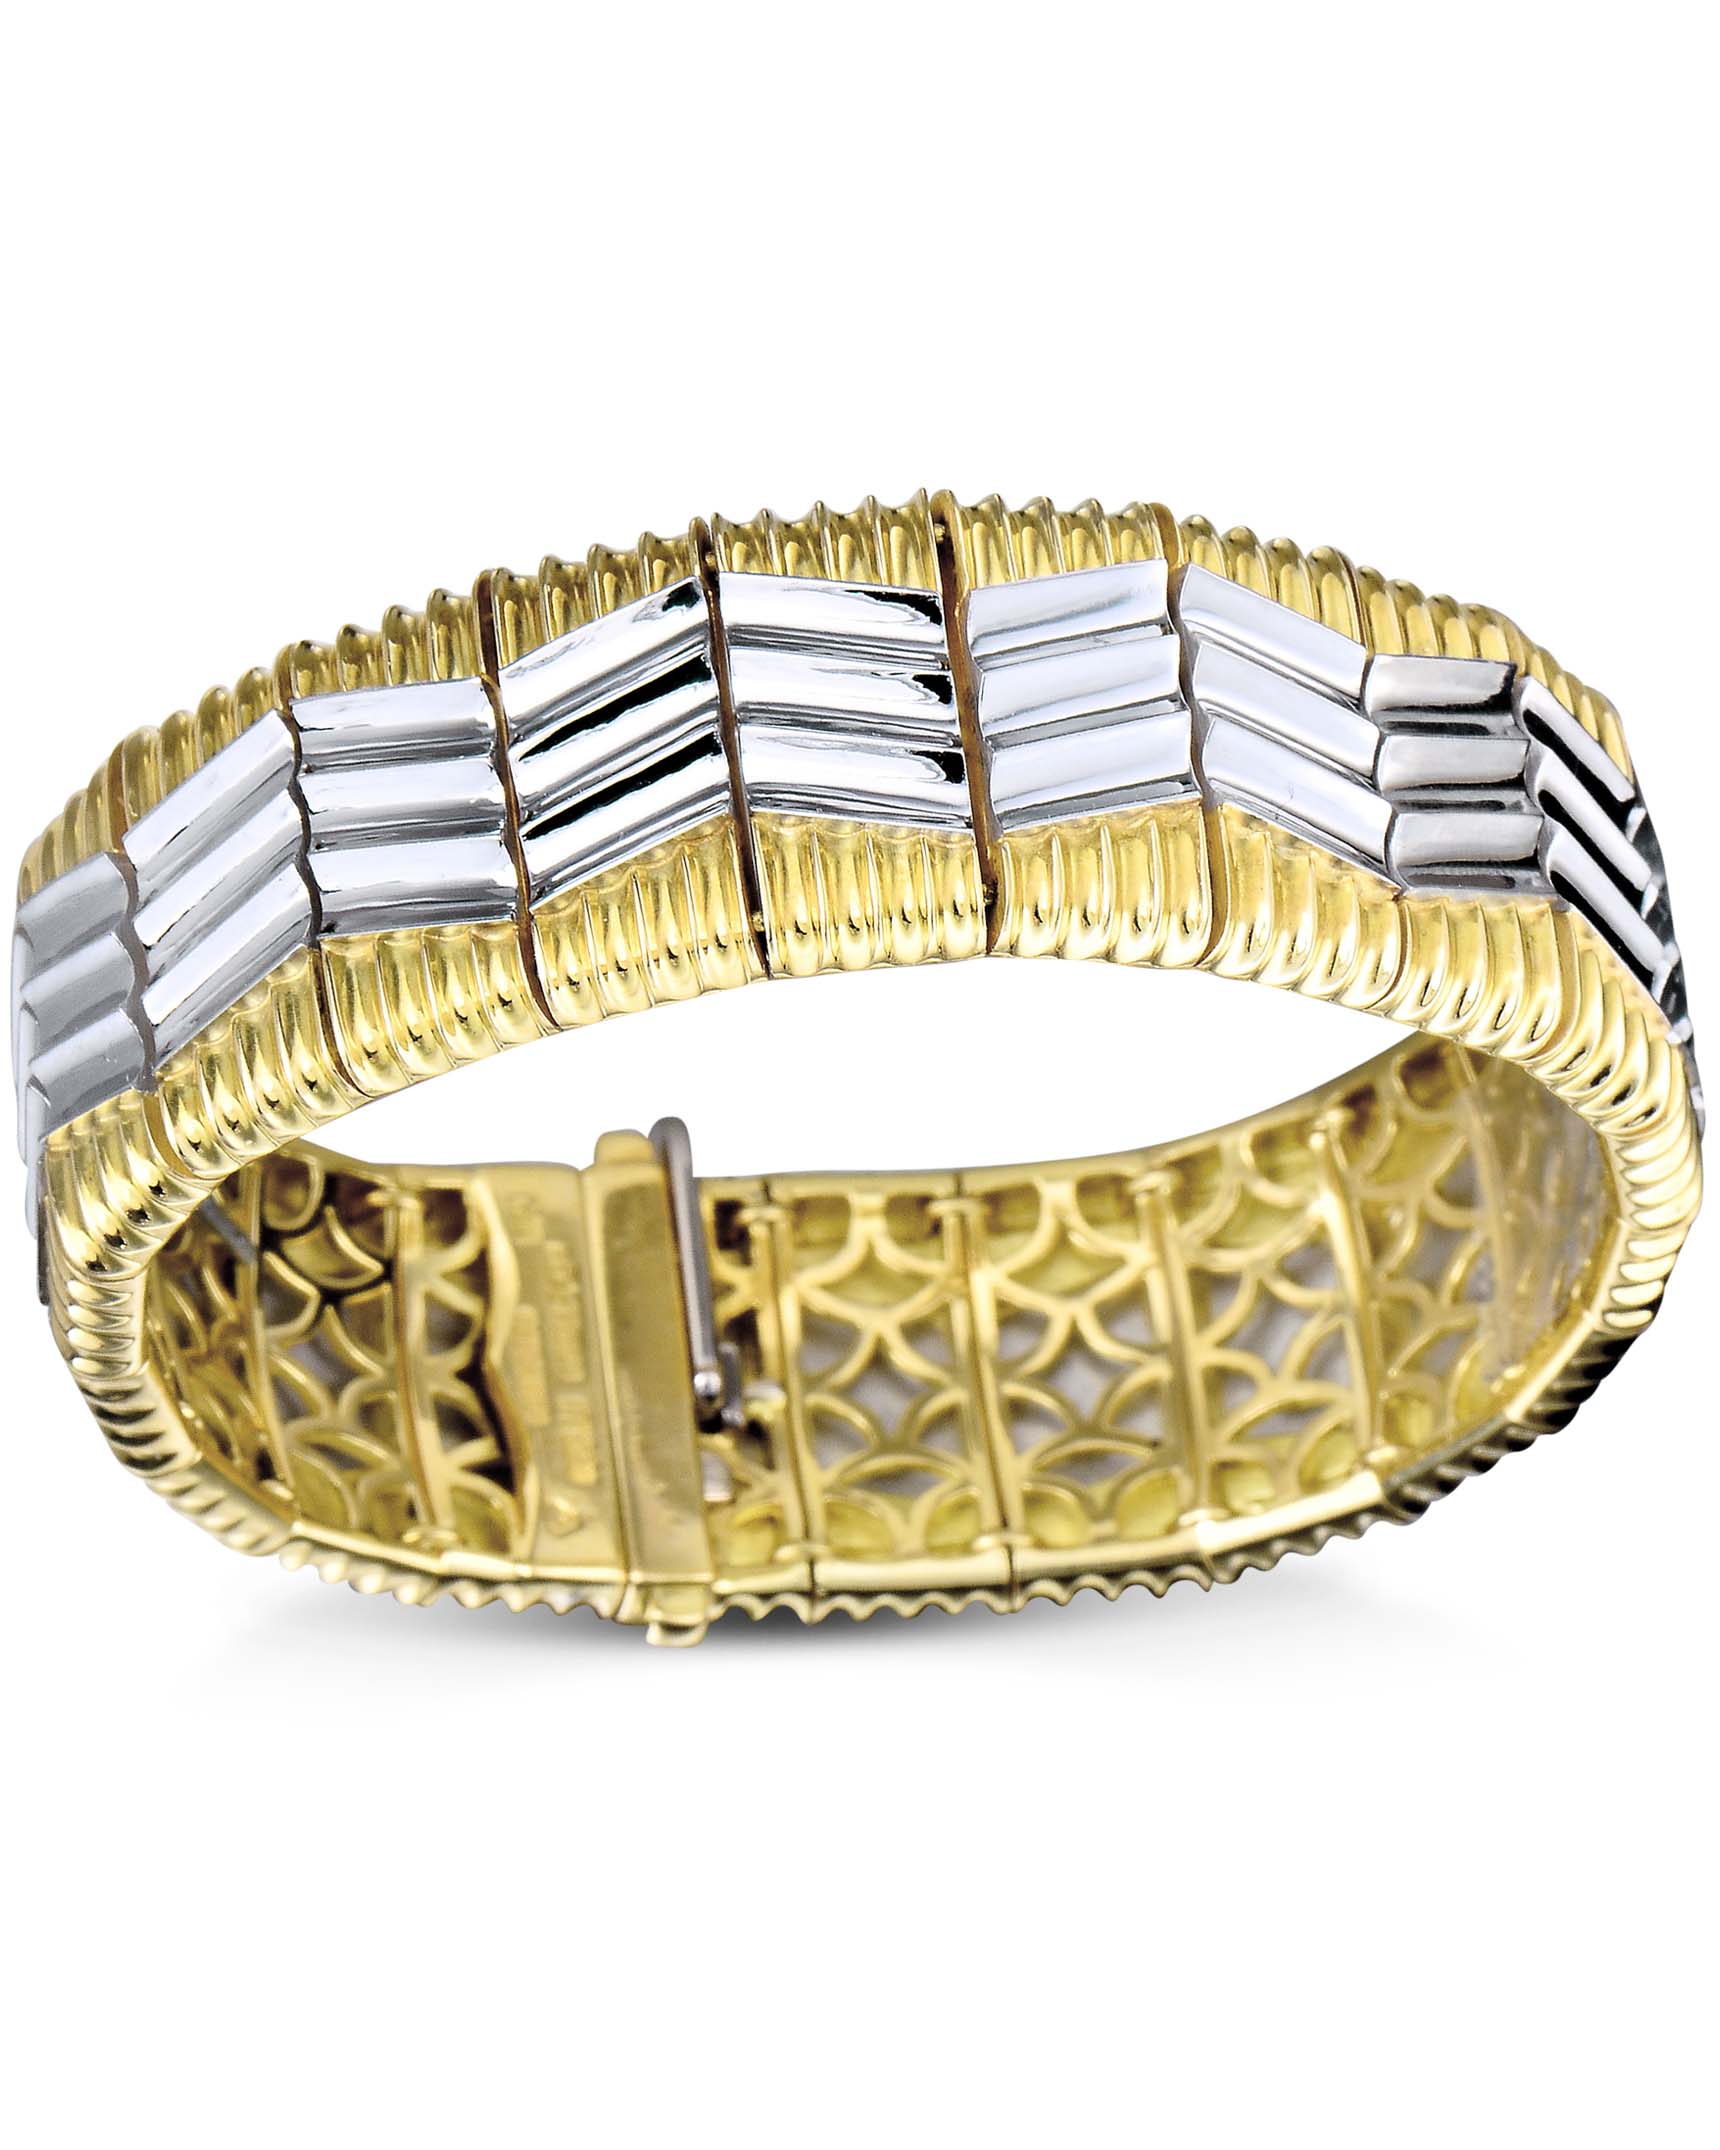 215mm Wedding Stainless Steel Gold Platinum Mens Bangle Cuff Bracelet, 5.2  Gm at Rs 350/piece in Mumbai